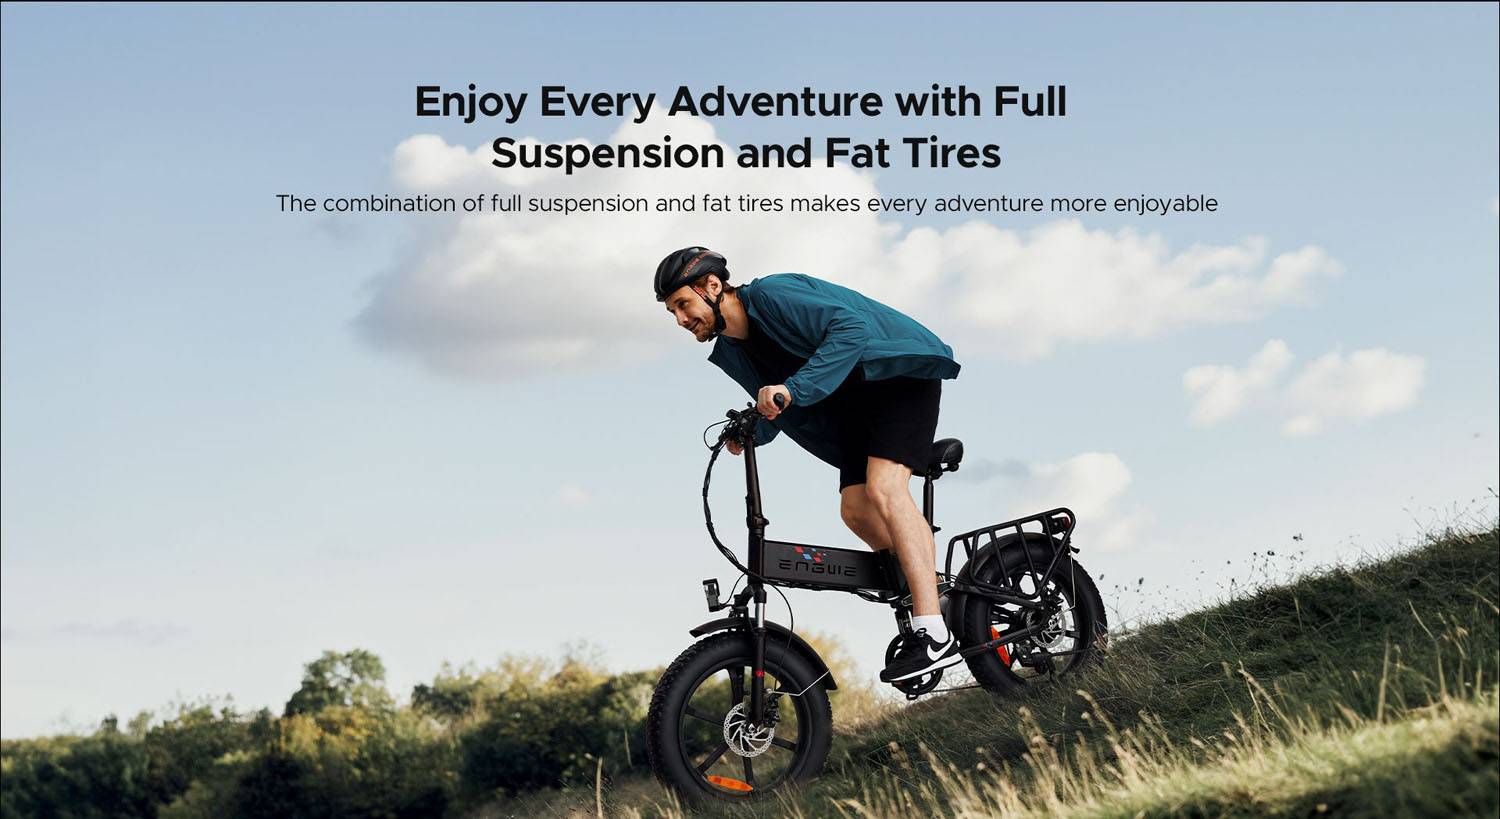 Enjoy Every Adventure With Full Suspension And Fat Tires